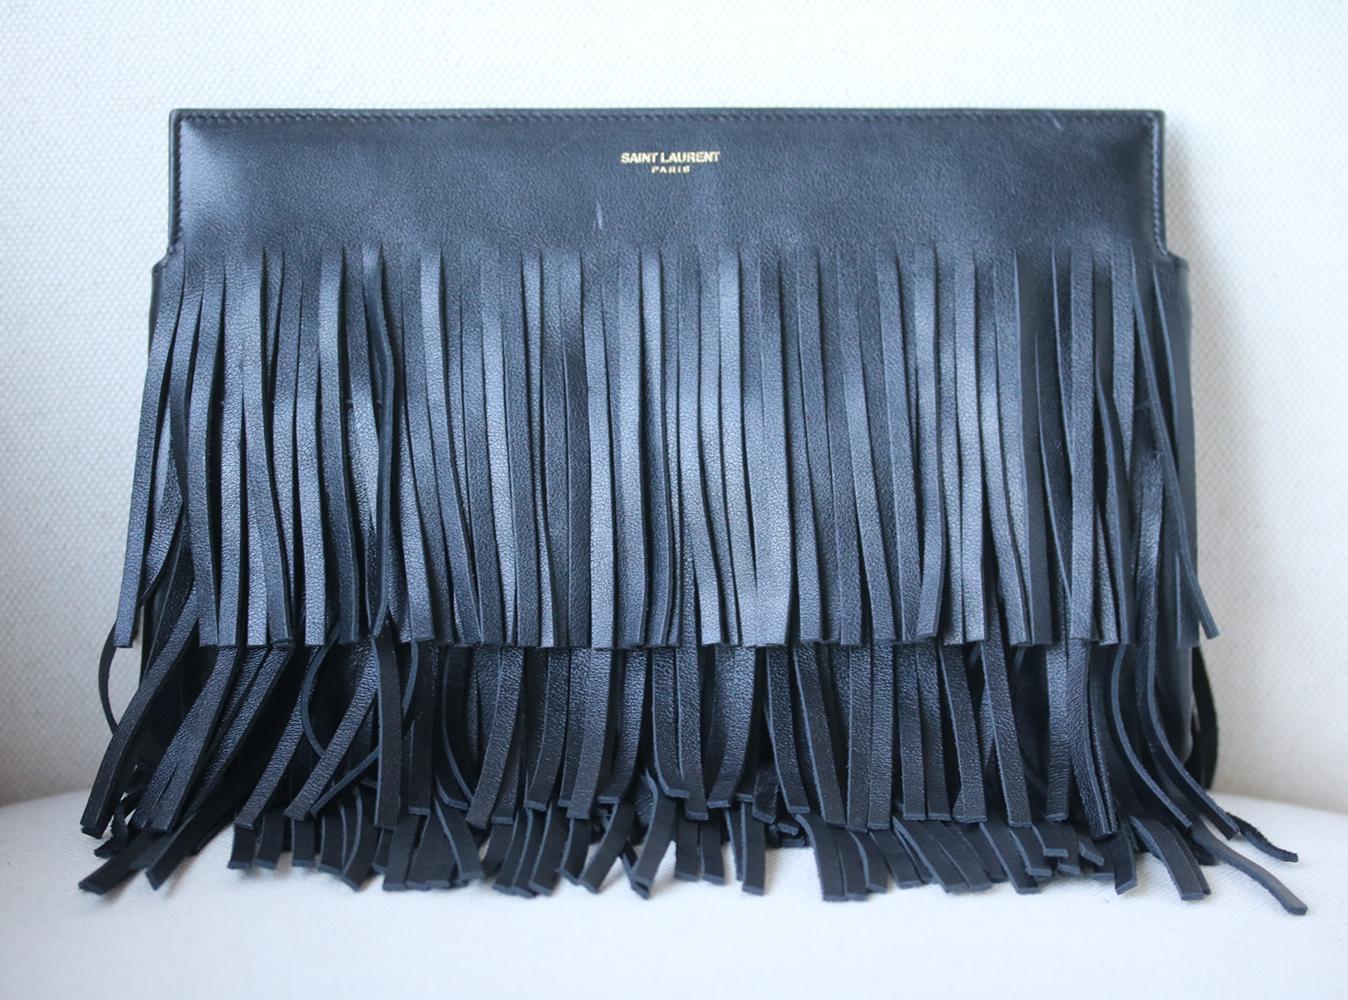 Saint Laurent nods to Western trends with this fringed black leather clutch. It's subtly embossed with gold designer lettering and features concealed magnetic fastenings for a clean, uncluttered look. Fill the faille-lined interior with all your